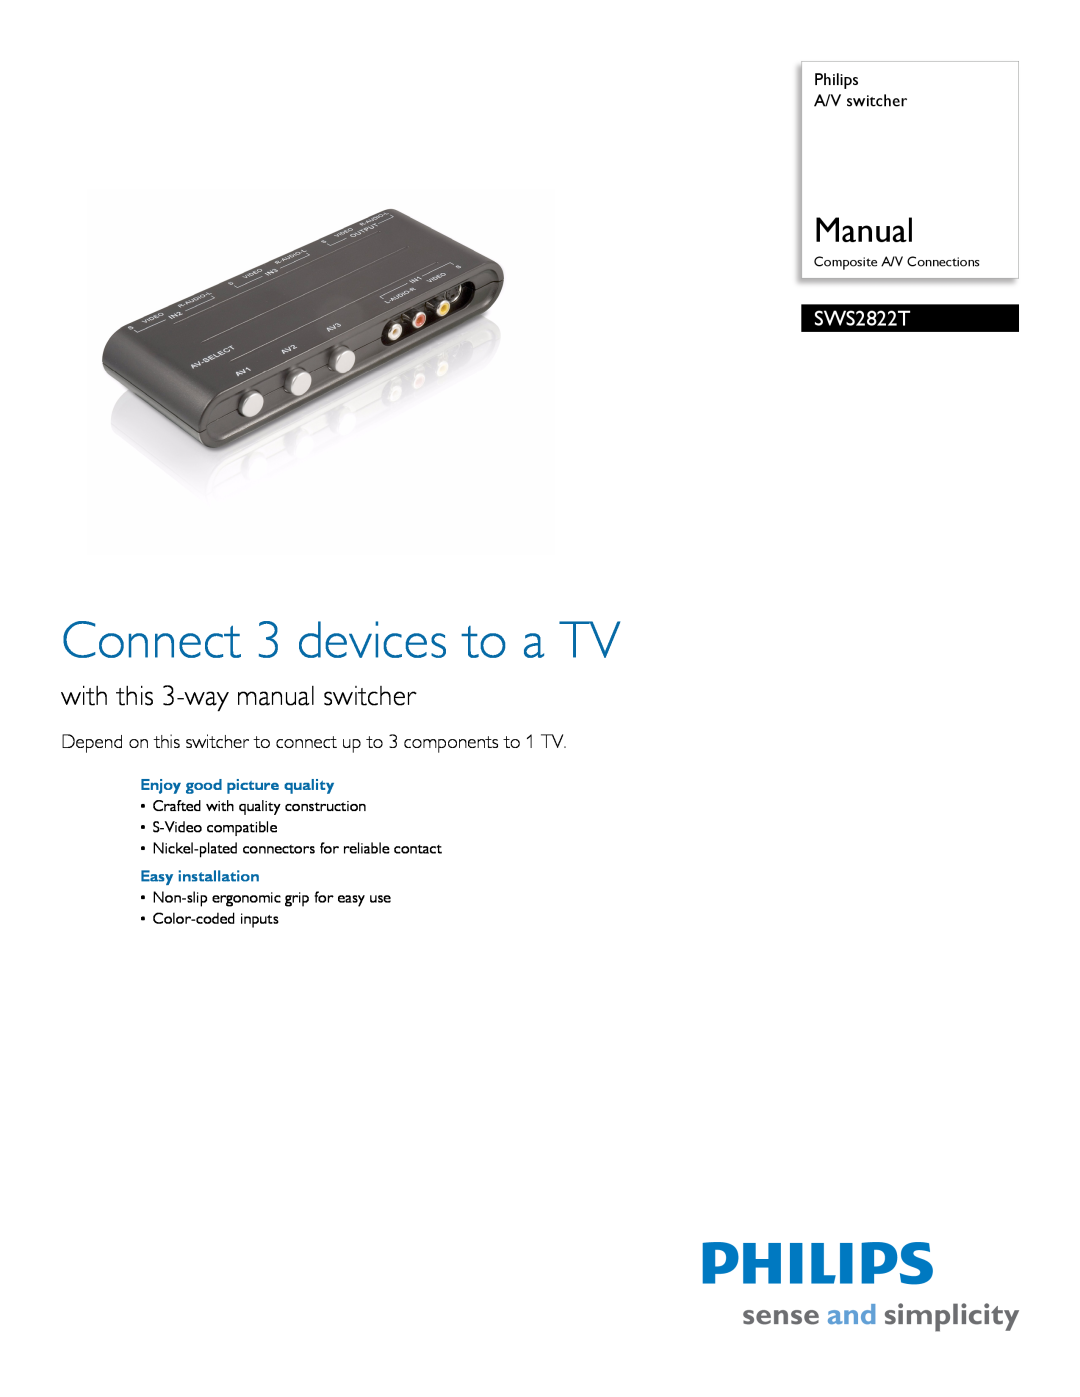 Philips SWS2822T/17 manual Philips A/V switcher, Enjoy good picture quality, Easy installation, Connect 3 devices to a TV 